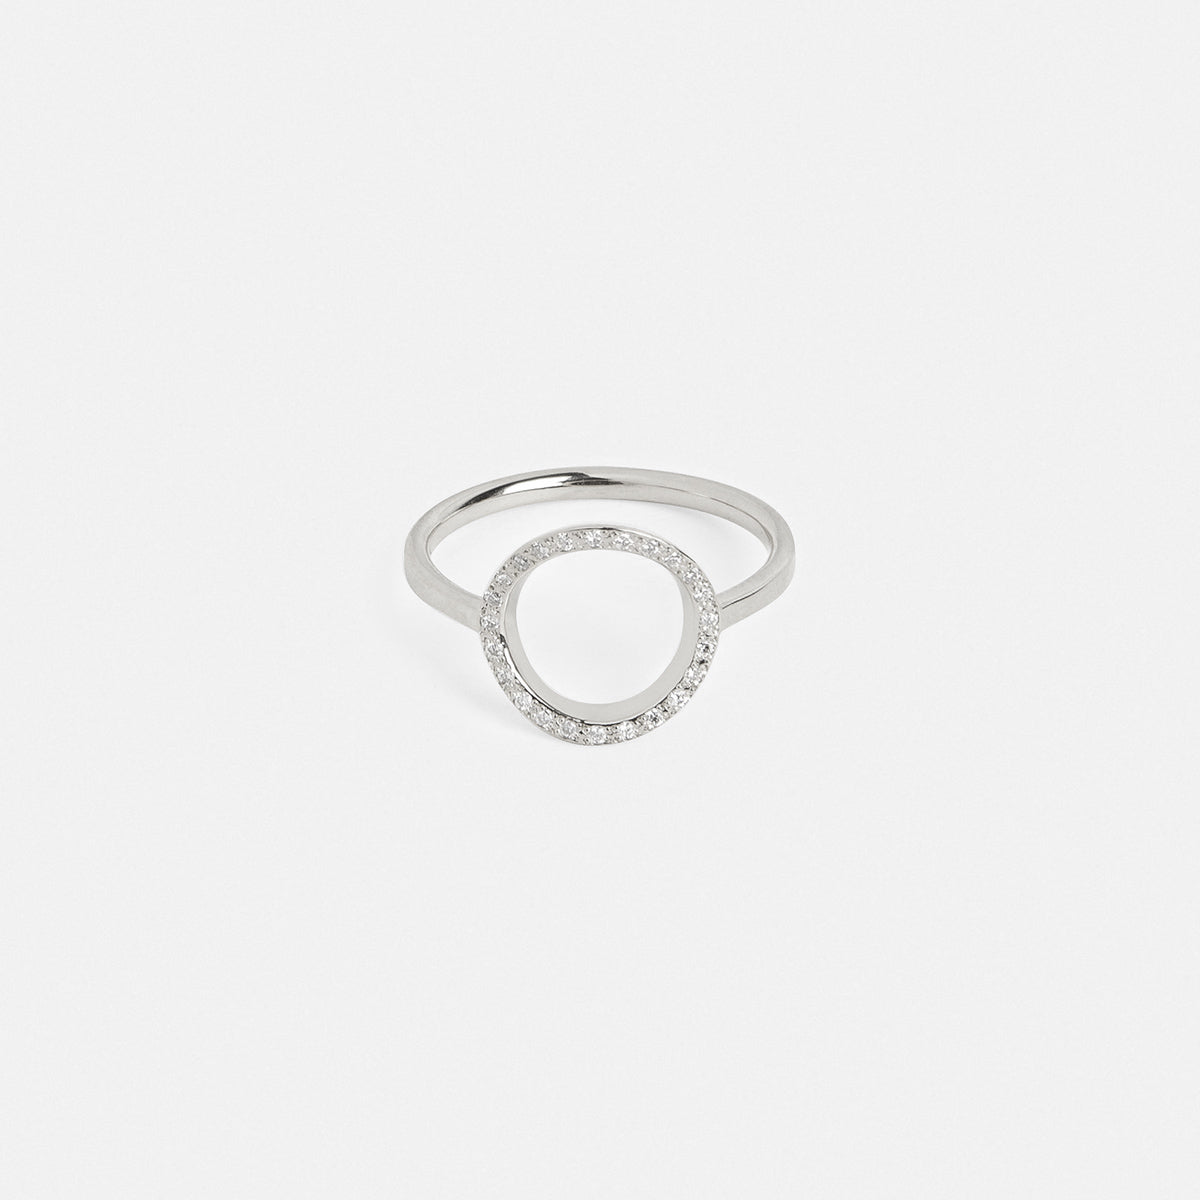  Nida Cool Ring in 14k White Gold set with White Diamonds by SHW Fine Jewelry